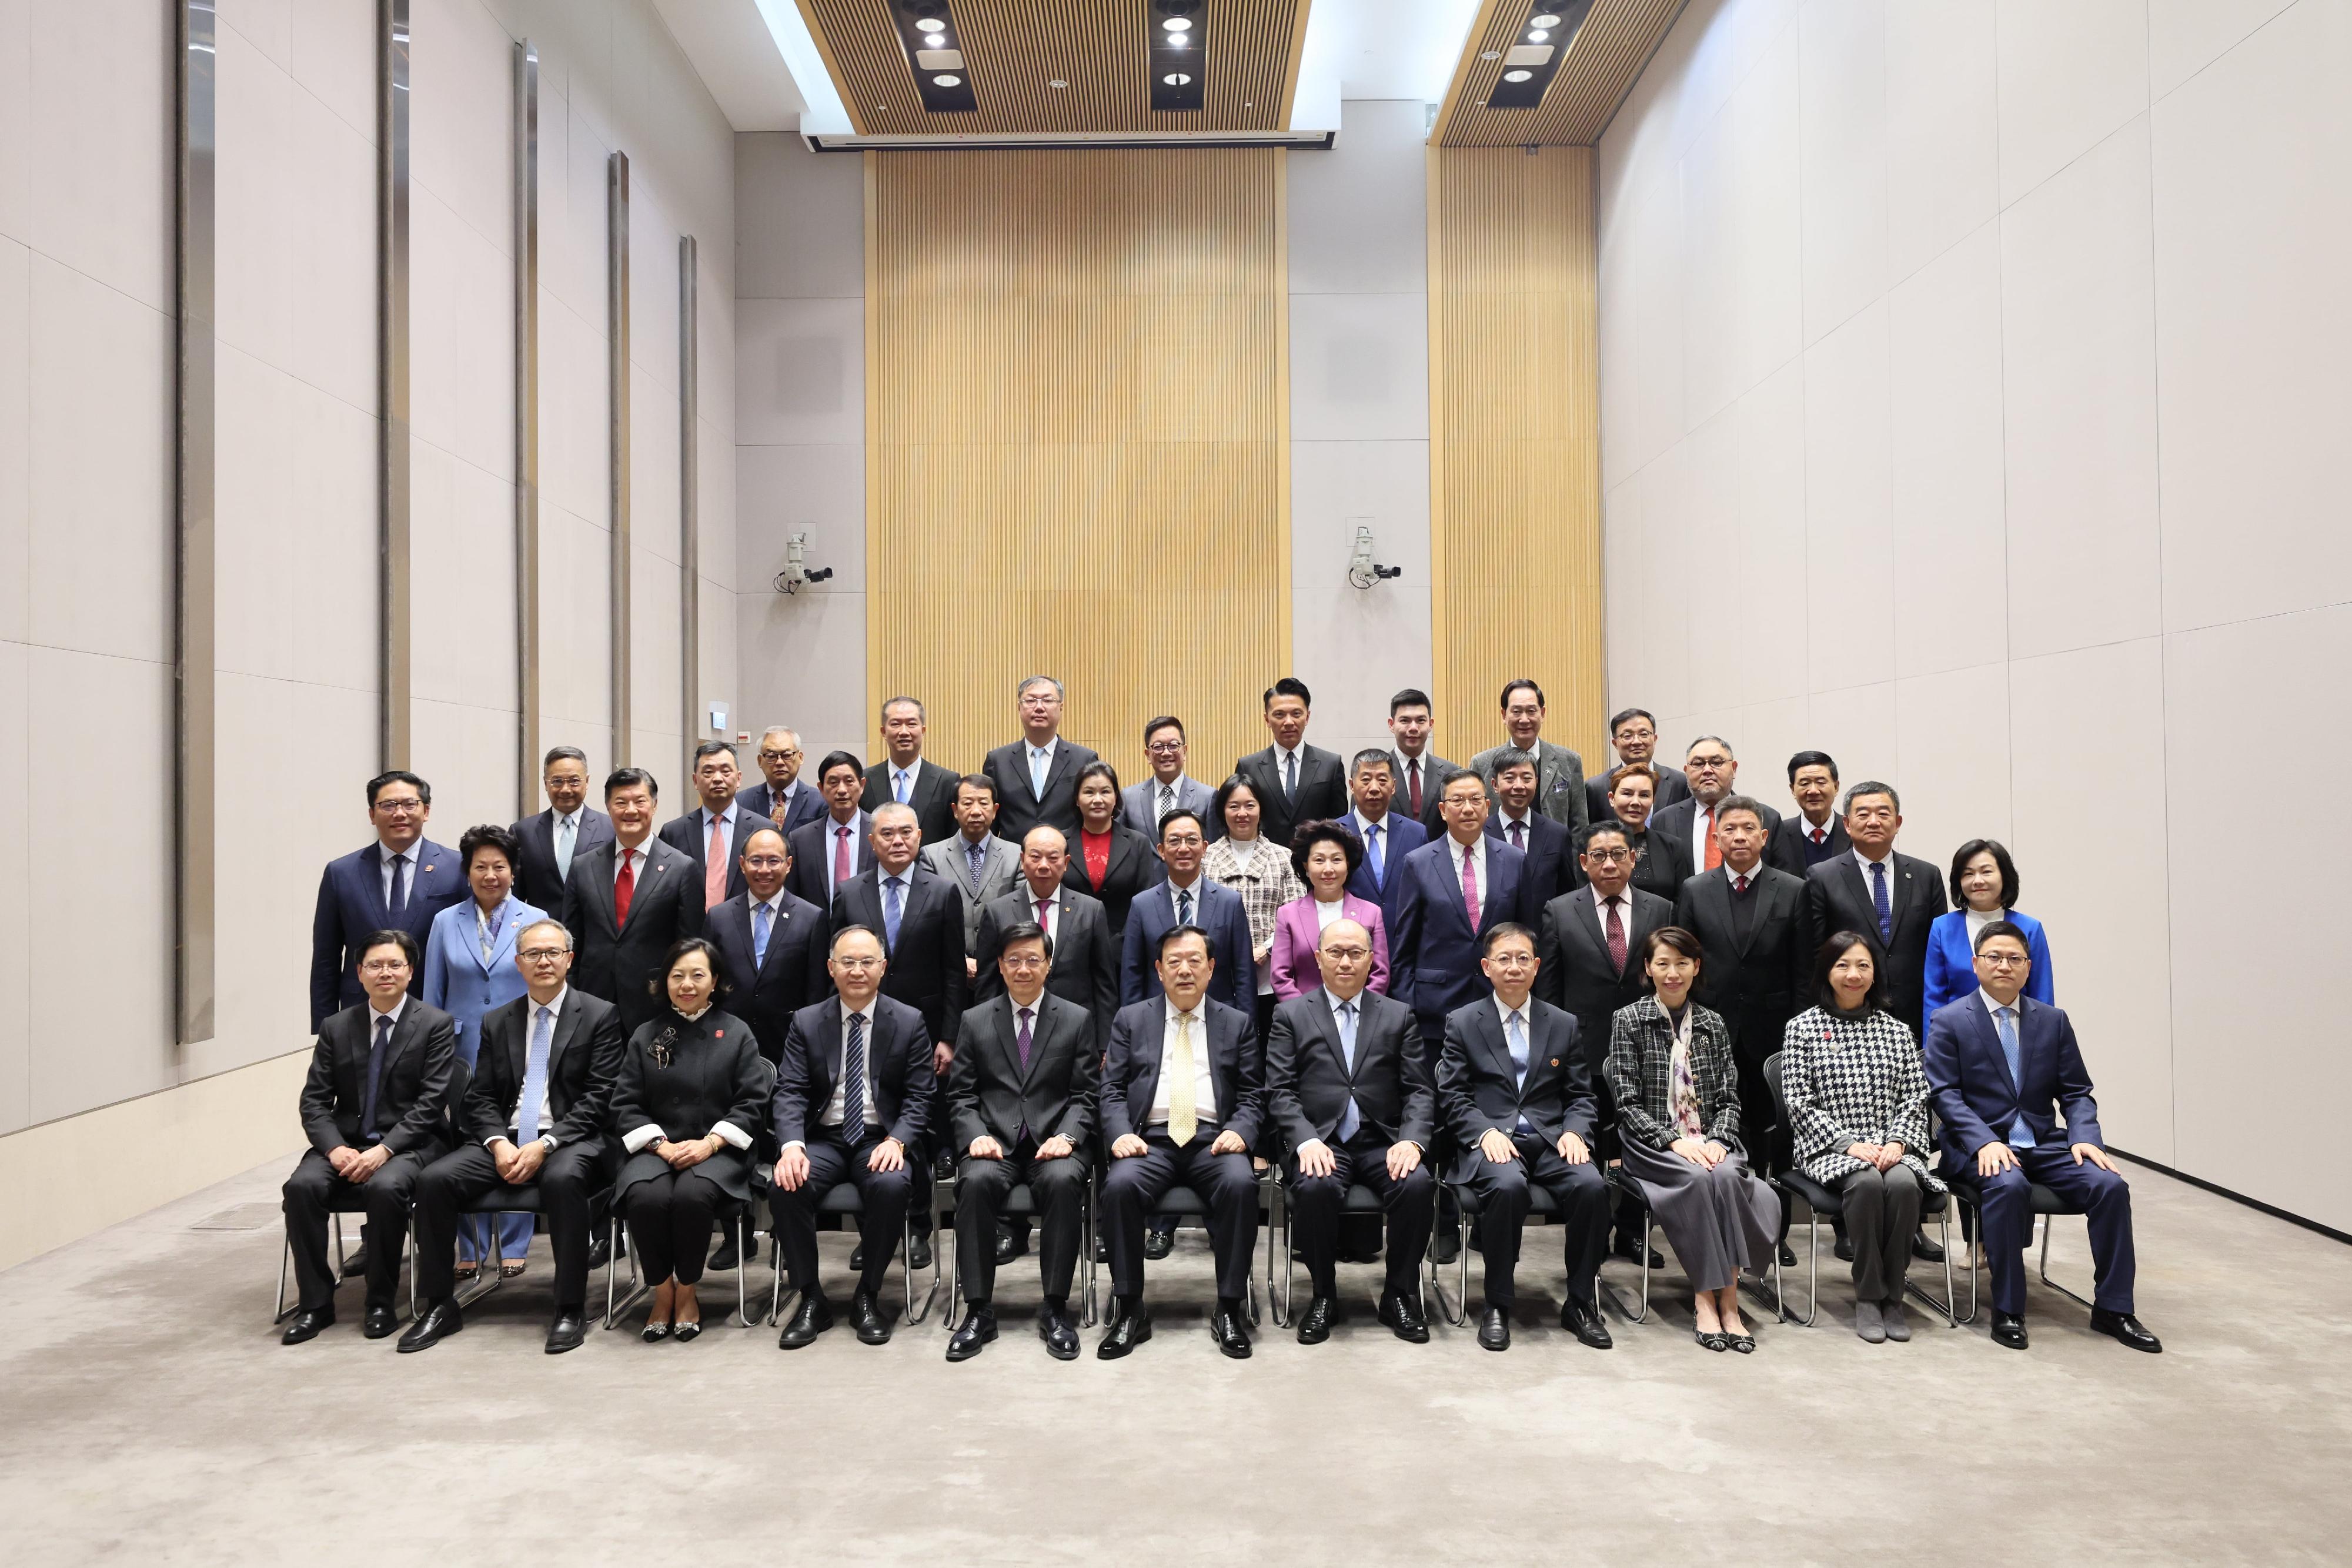 The Director of the Hong Kong and Macao Work Office of the Communist Party of China Central Committee and the Hong Kong and Macao Affairs Office of the State Council, Mr Xia Baolong, today (February 26) continued his inspection visit to Hong Kong. Photo shows Mr Xia (front row, centre), in the company of the Chief Executive, Mr John Lee (front row, fifth left), and the Secretary for Home and Youth Affairs, Miss Alice Mak (front row, third left), attending an exchange session with representatives from patriotic community groups with an affection for the country and the city.